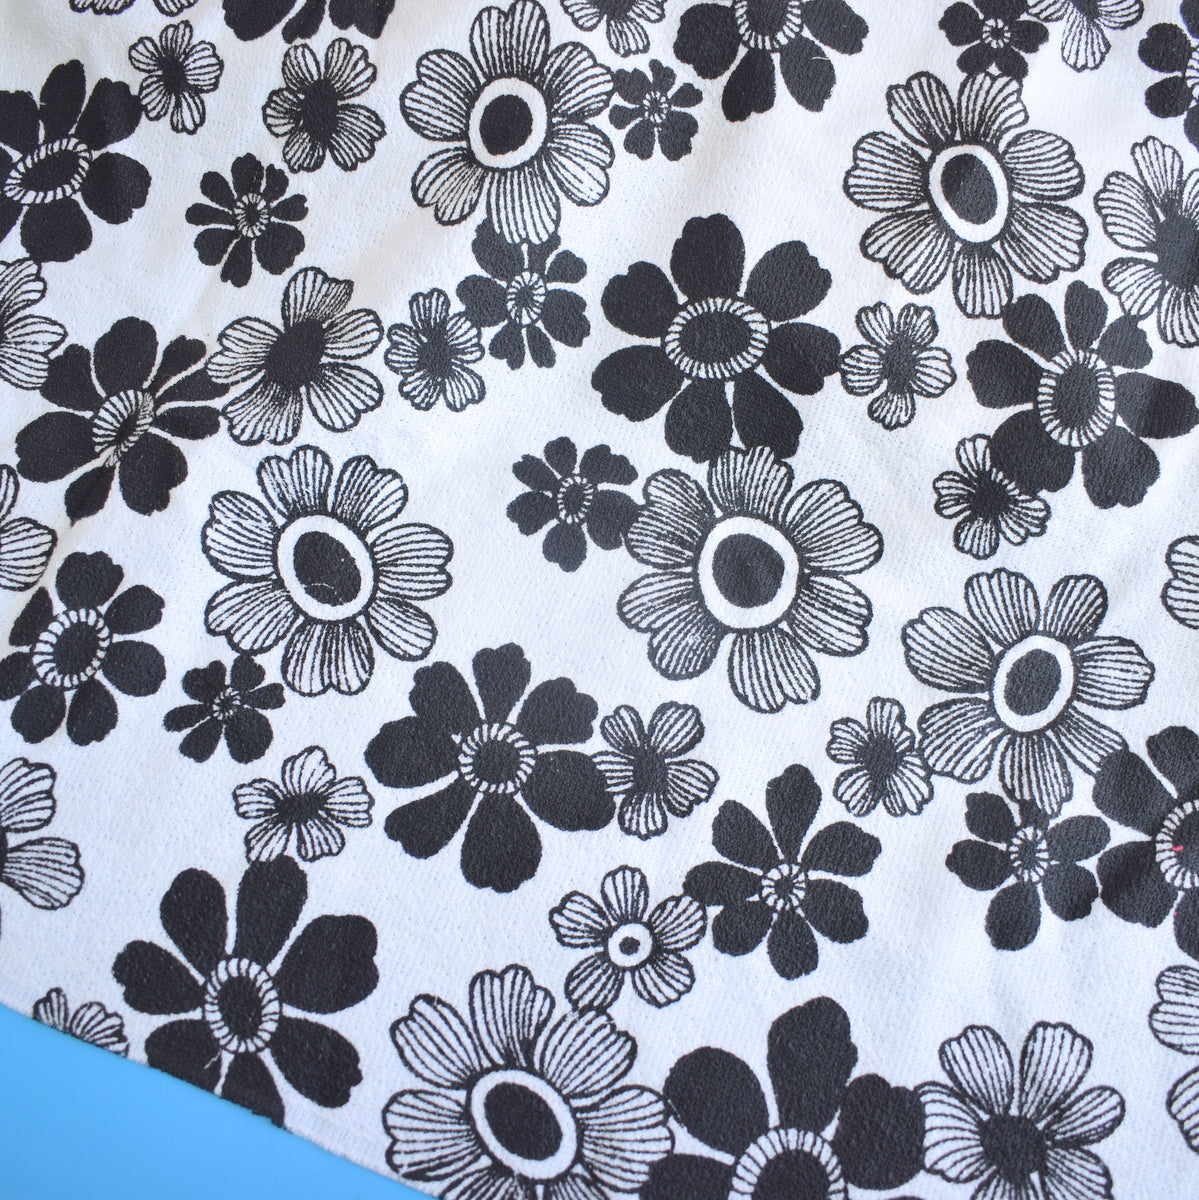 Vintage 1960s Towelling Fabric - Pink Flower Power Or Monochrome